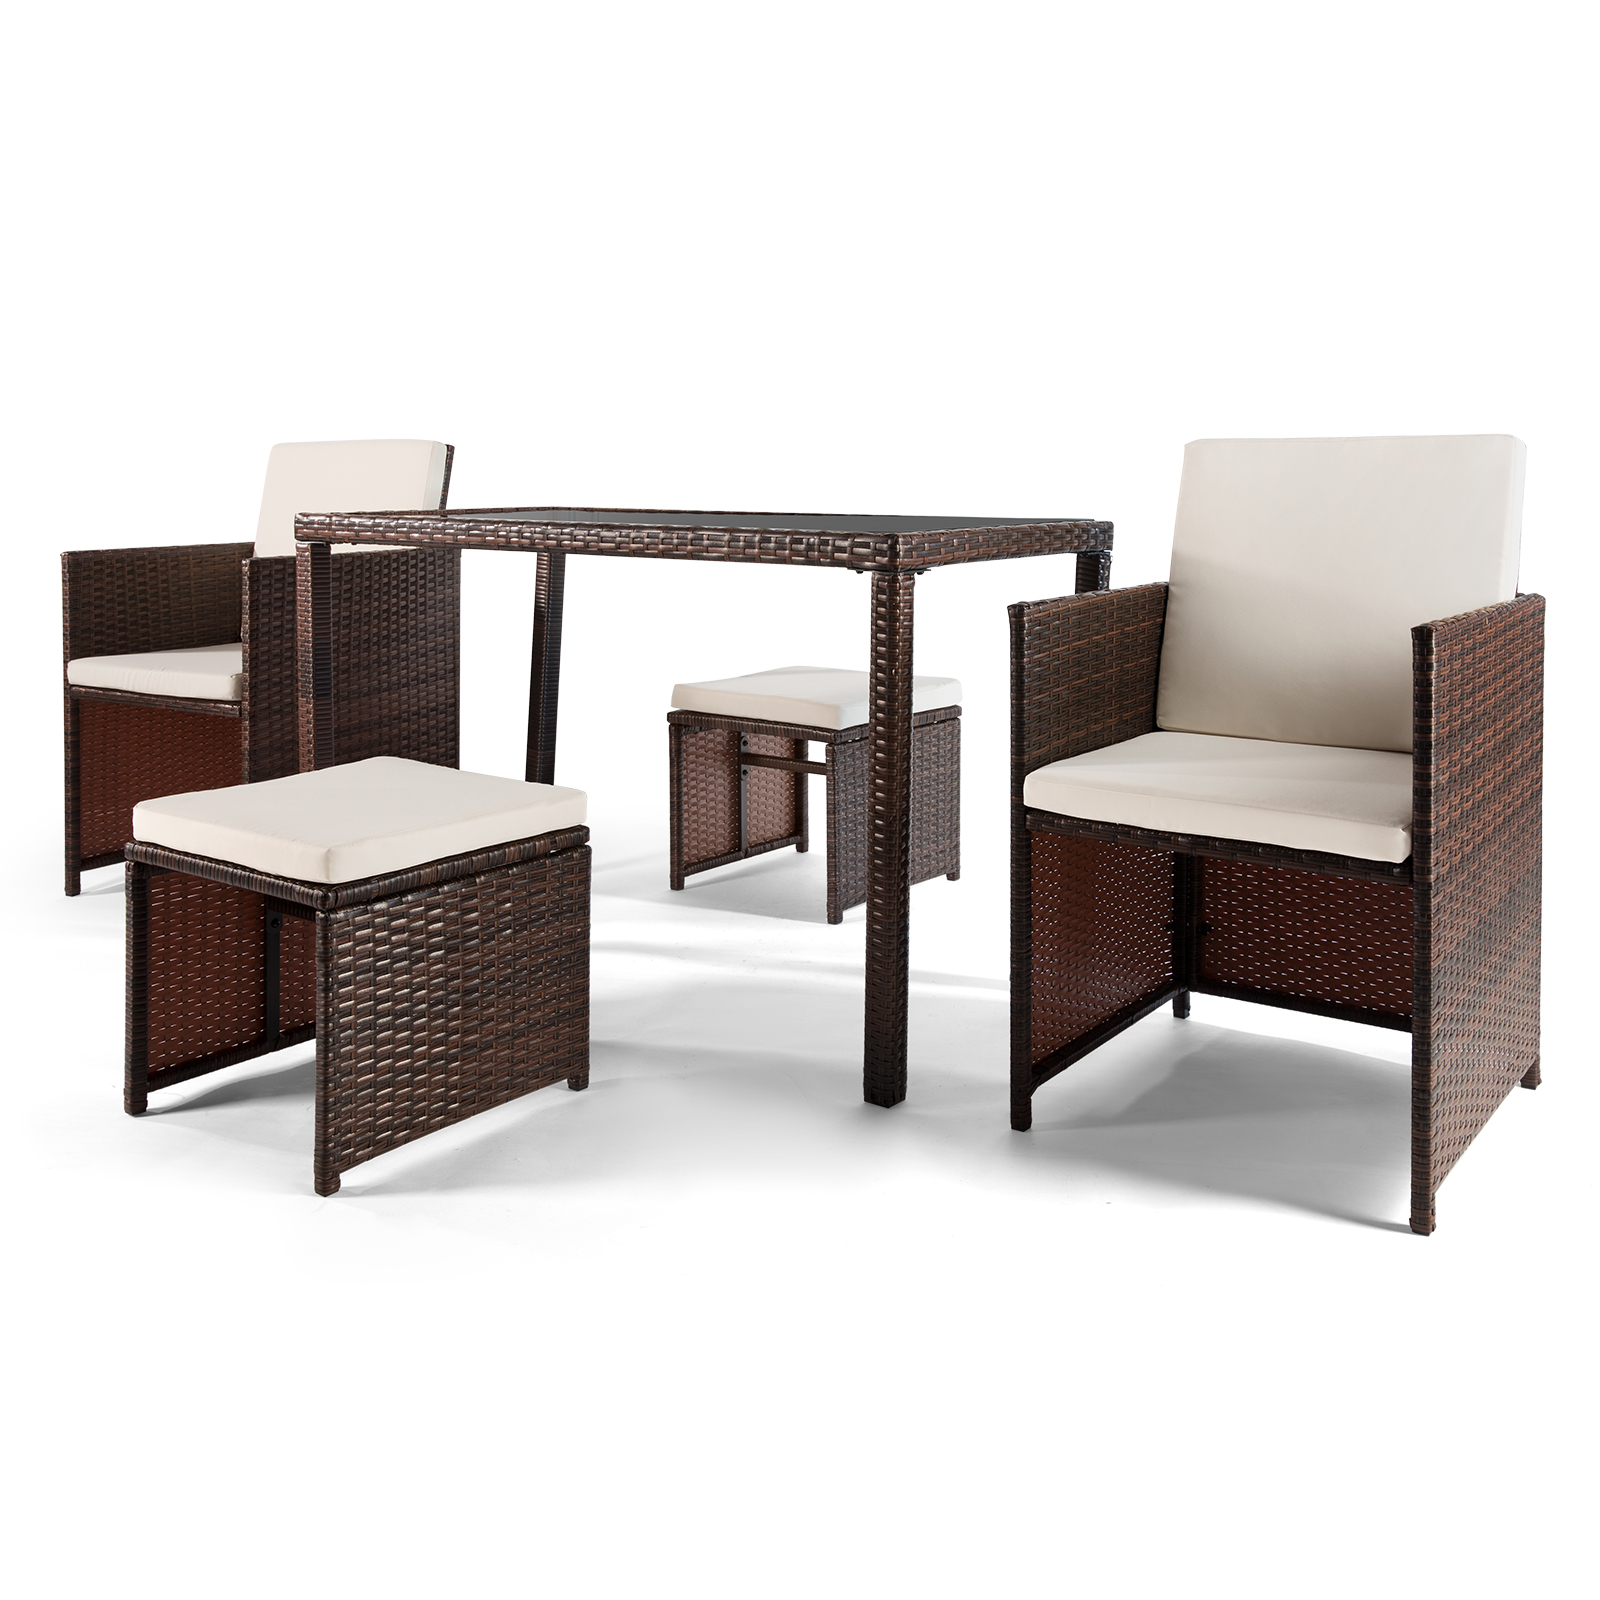 5 Piece Outdoor Patio Dining Set with 2 Wicker Armchairs, 2 Ottomans, Dining Table, All-Weather Space Saving Rattan Outdoor Conversation Set with Cushions for Backyard, Lawn, Garden, Poolside, LLL127 - image 2 of 10